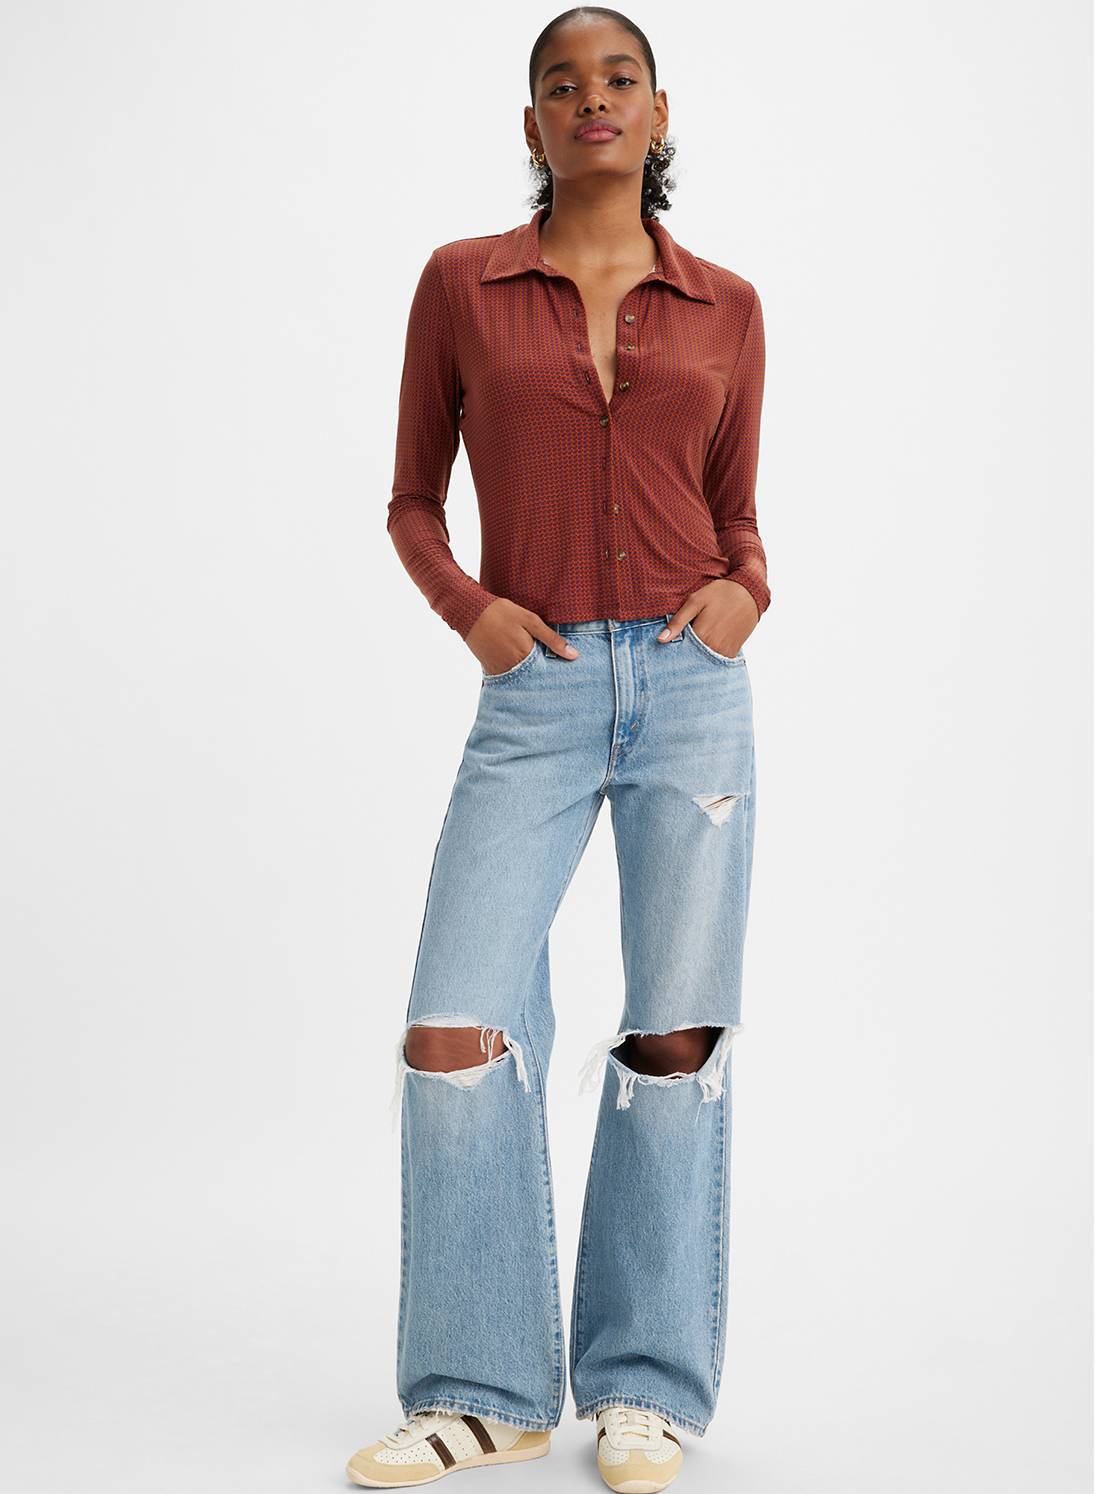 Baggy Bootcut Jeans 1